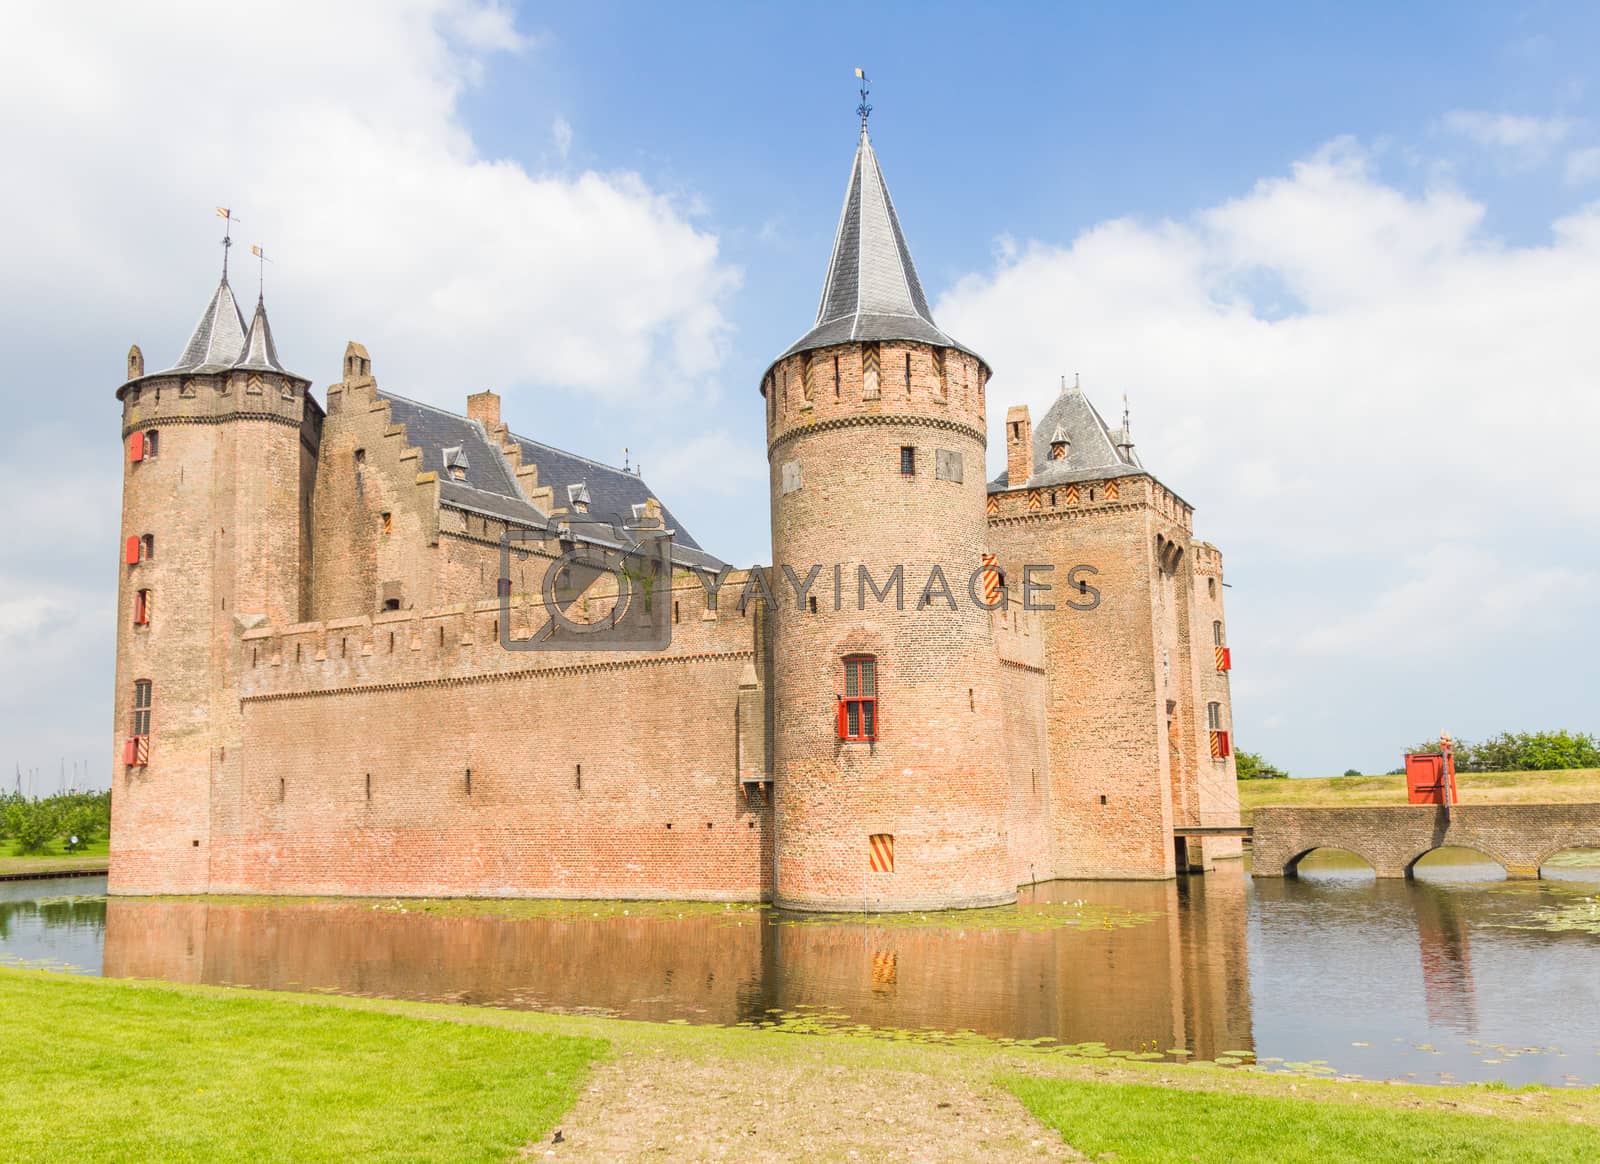 Royalty free image of Muiderslot, medieval castle in Muiden, The Netherlands by gianliguori